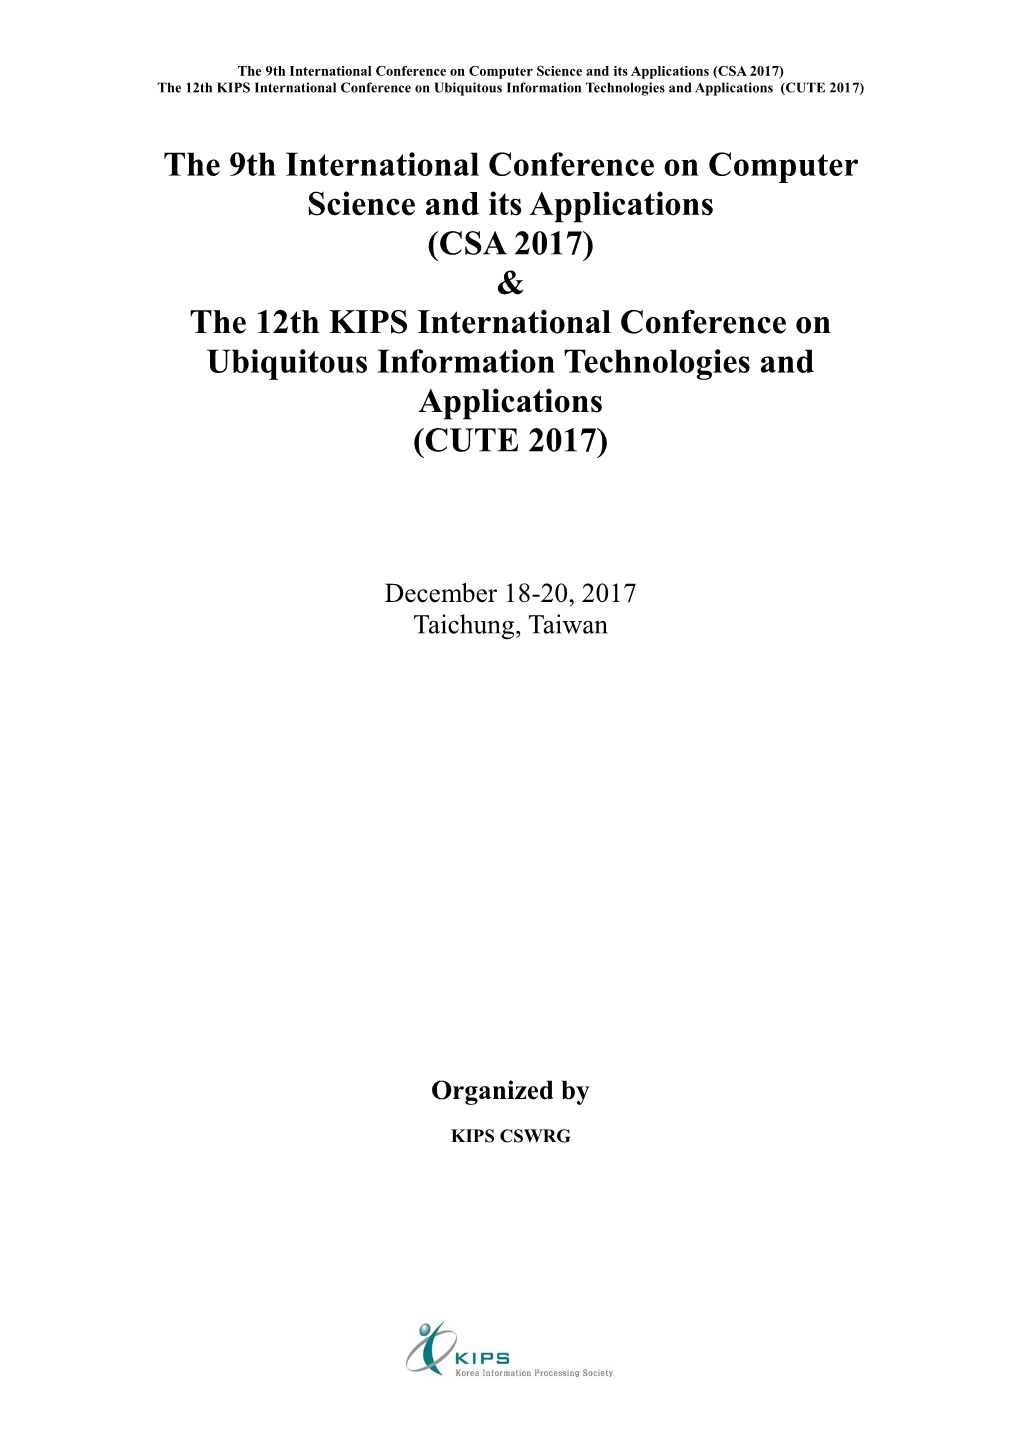 The 9Th International Conference on Computer Science and Its Applications (CSA 2017) & the 12Th KIPS International Conferenc